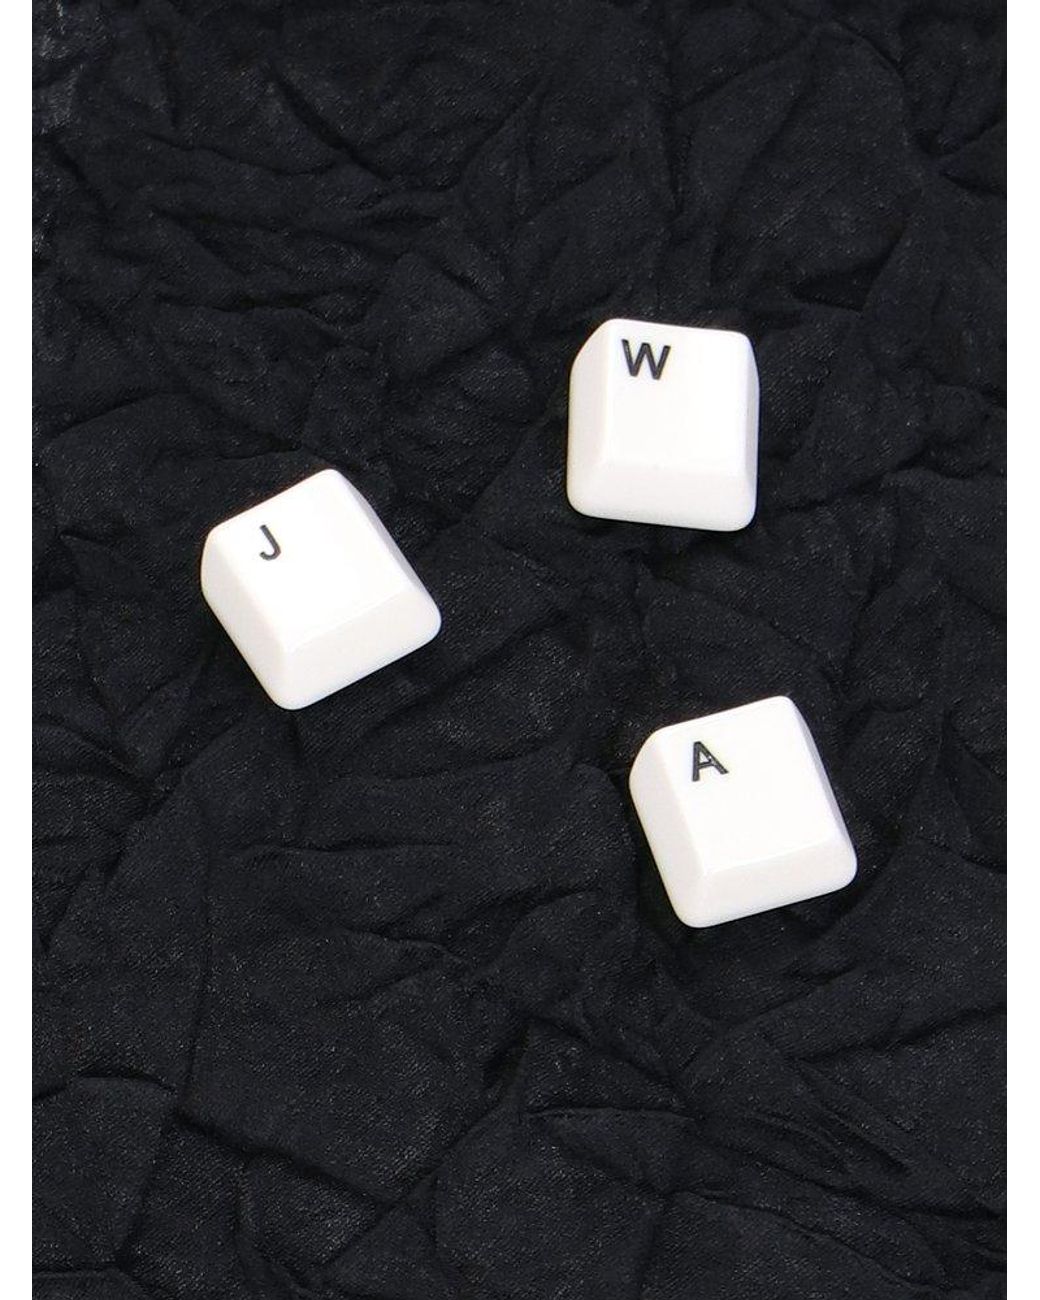 JW Anderson fashion show features clothing made from computer keys